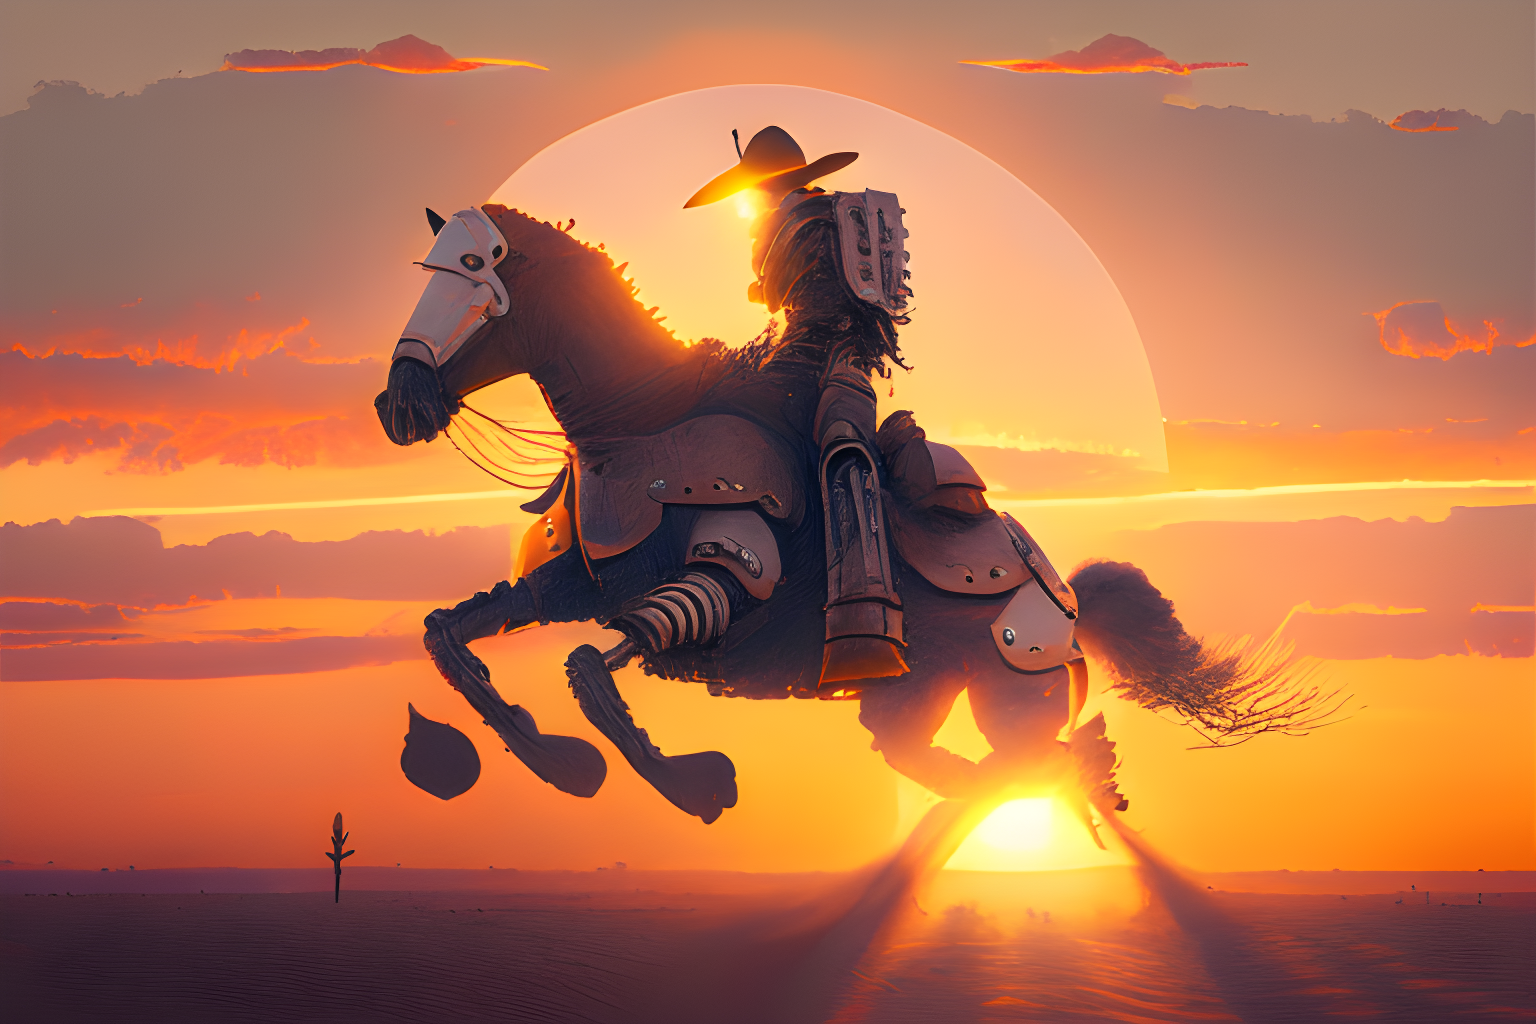 robot cowboy riding off into the sunset